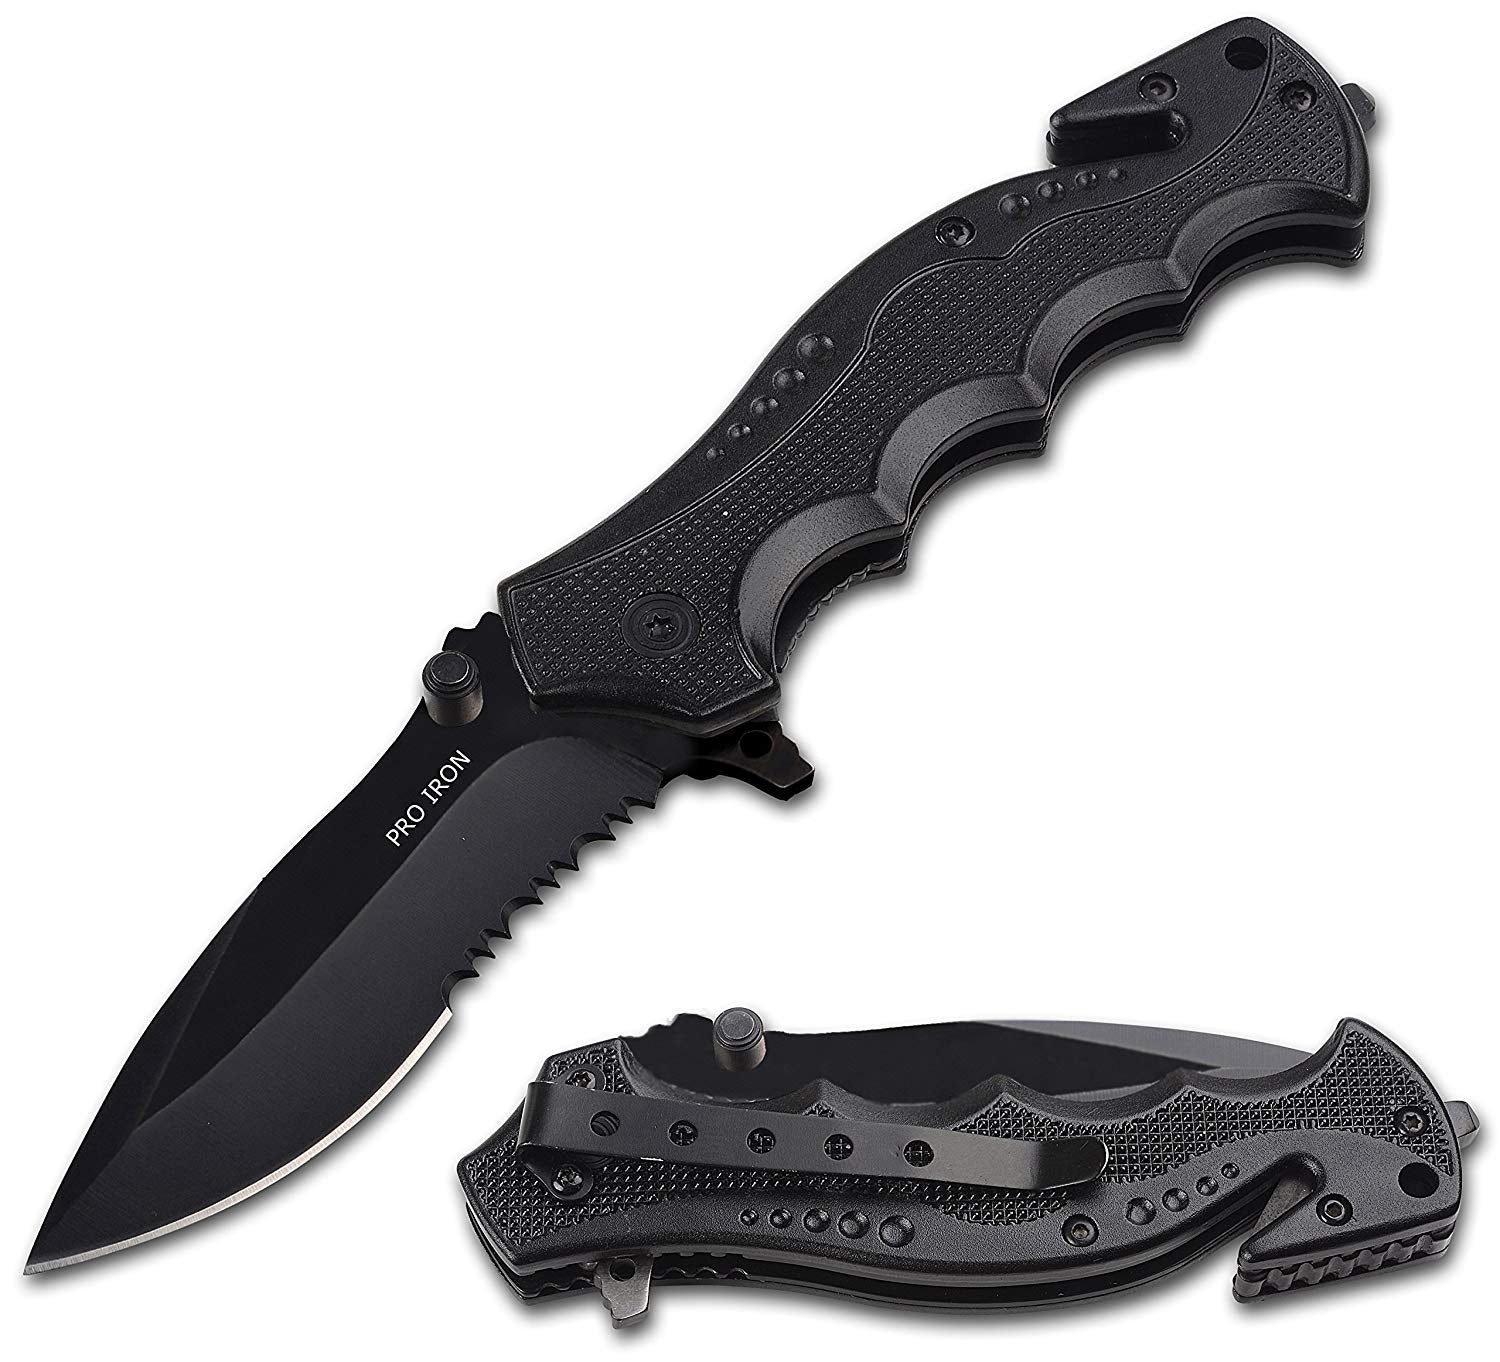 Serrated Edge Outdoor Survival Camping Hunting Knife - 2 Knives - Black